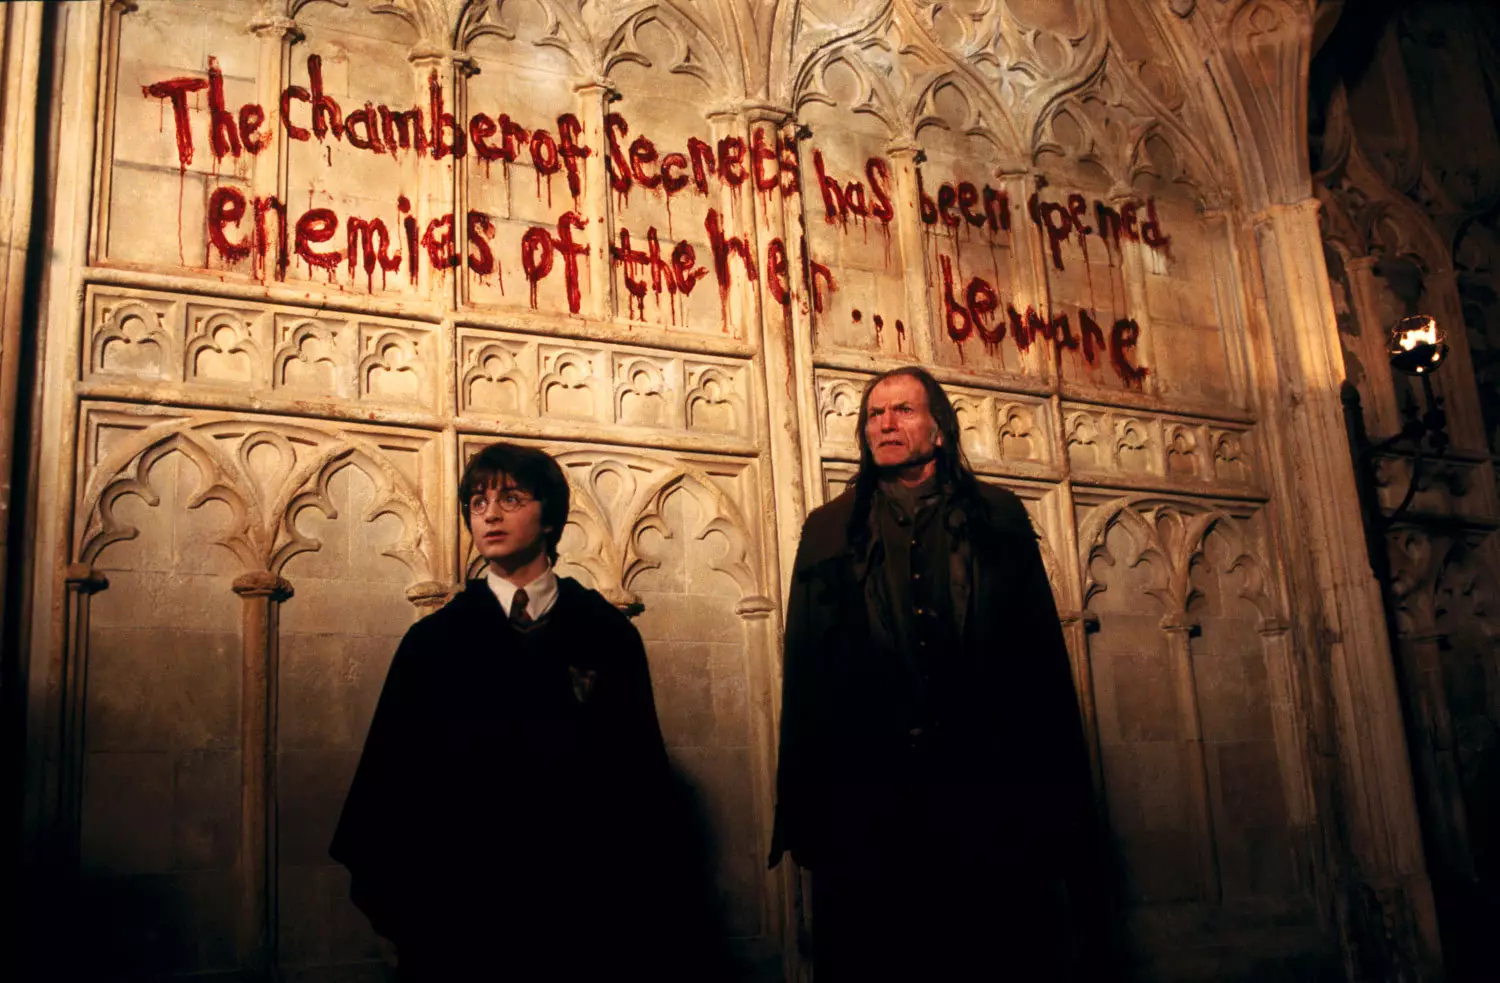 Filch is always aware of trouble in the castle (